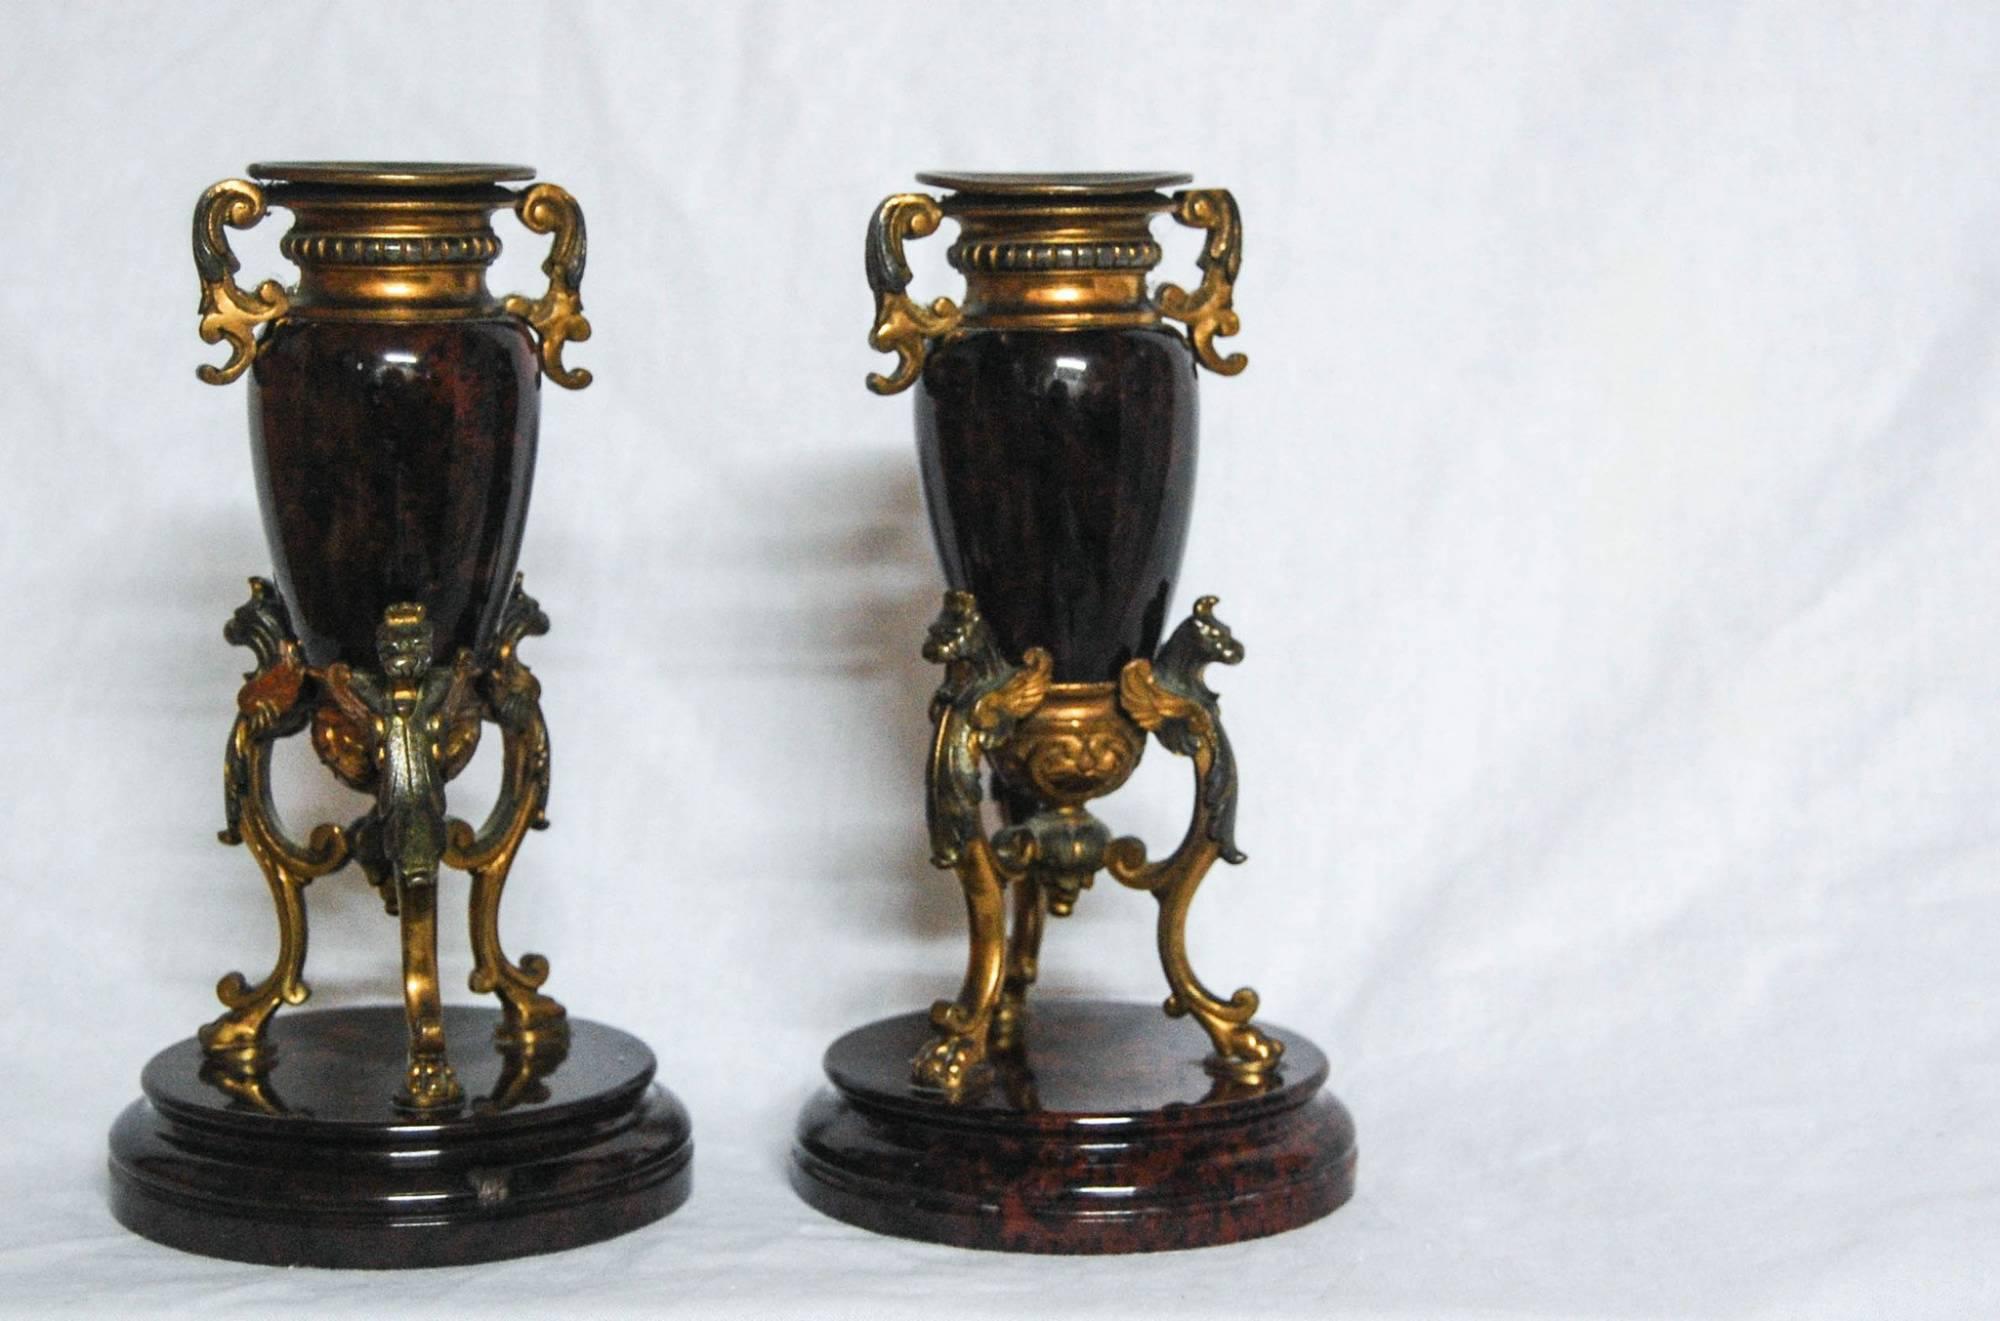 A superb pair of early Victorian serpentine and gilt metal candlestick holders.

The candle holders are comprised of a solid circular serpentine base with three fire gilt metal struts in the form of winged lions holding a classical serpentine urn